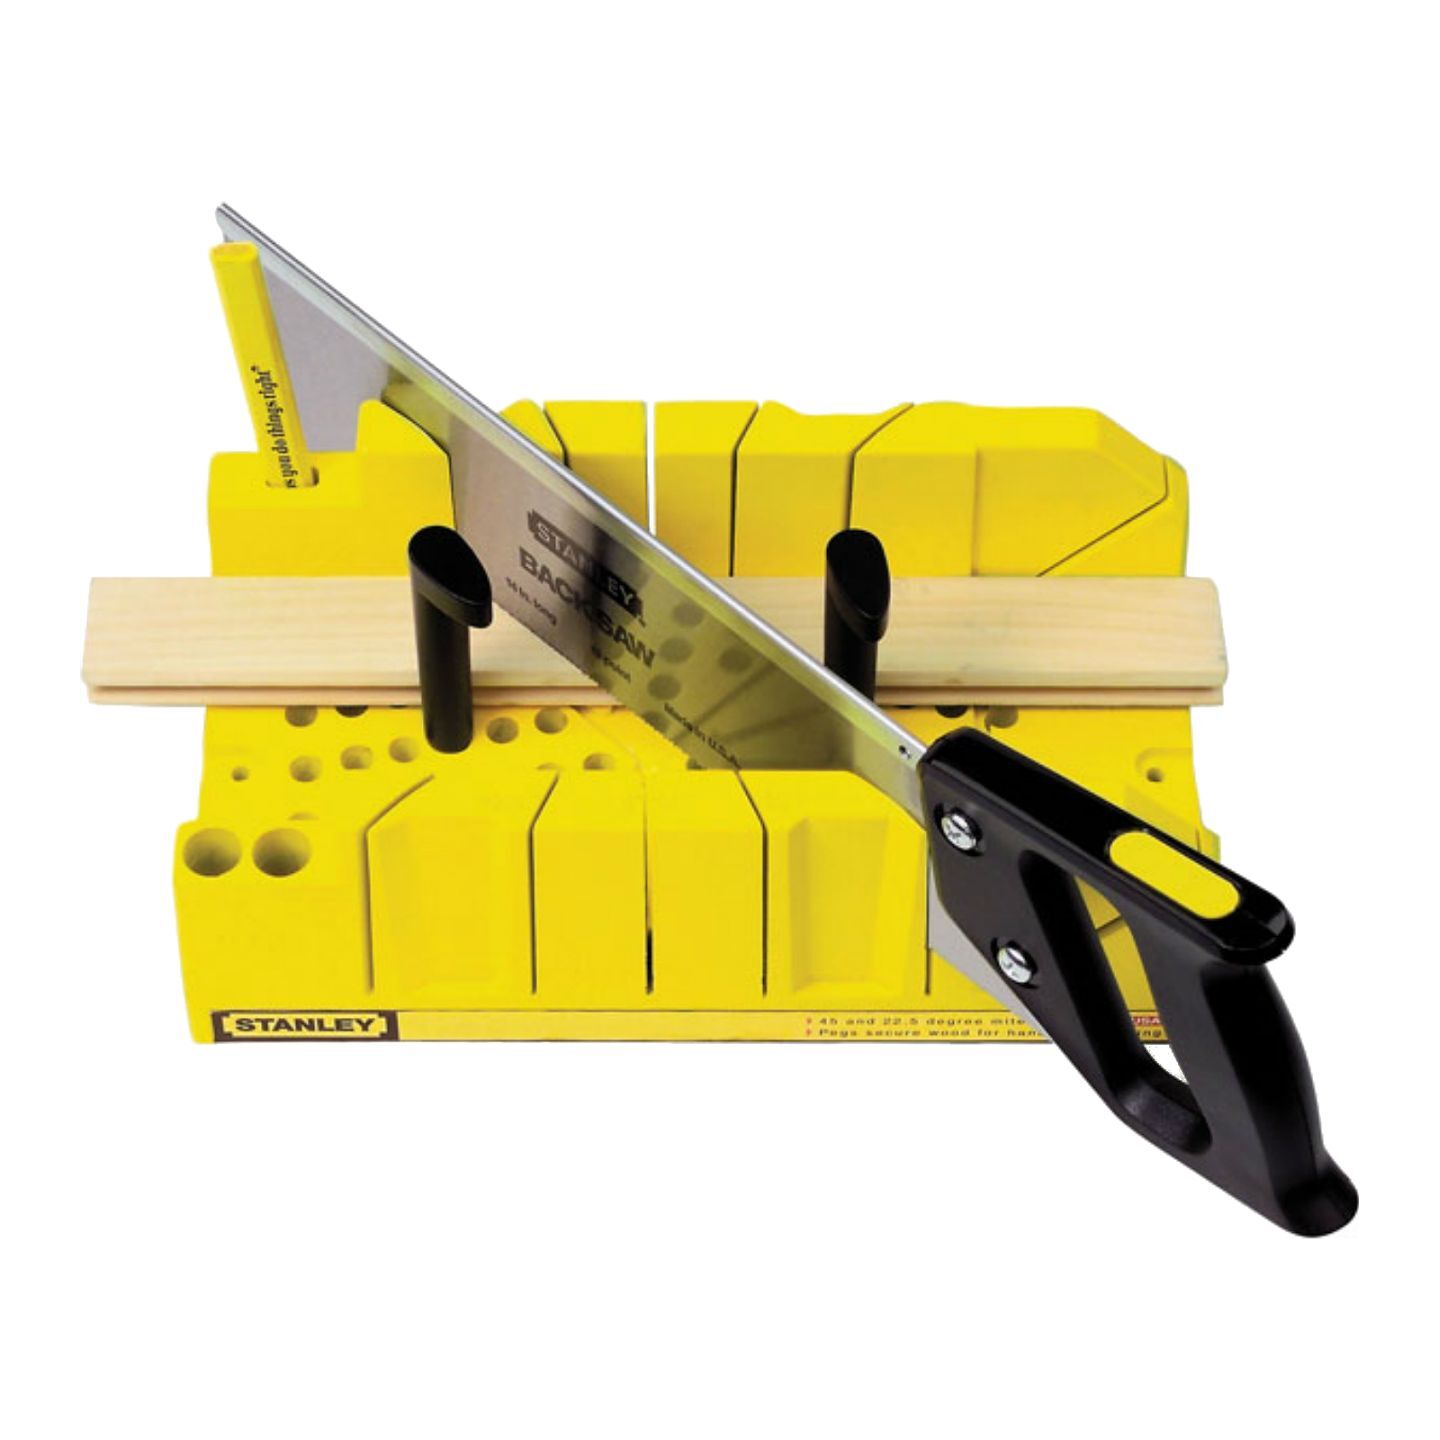 Stanley 20-600 Clamping Mitre Box with 12" Saw